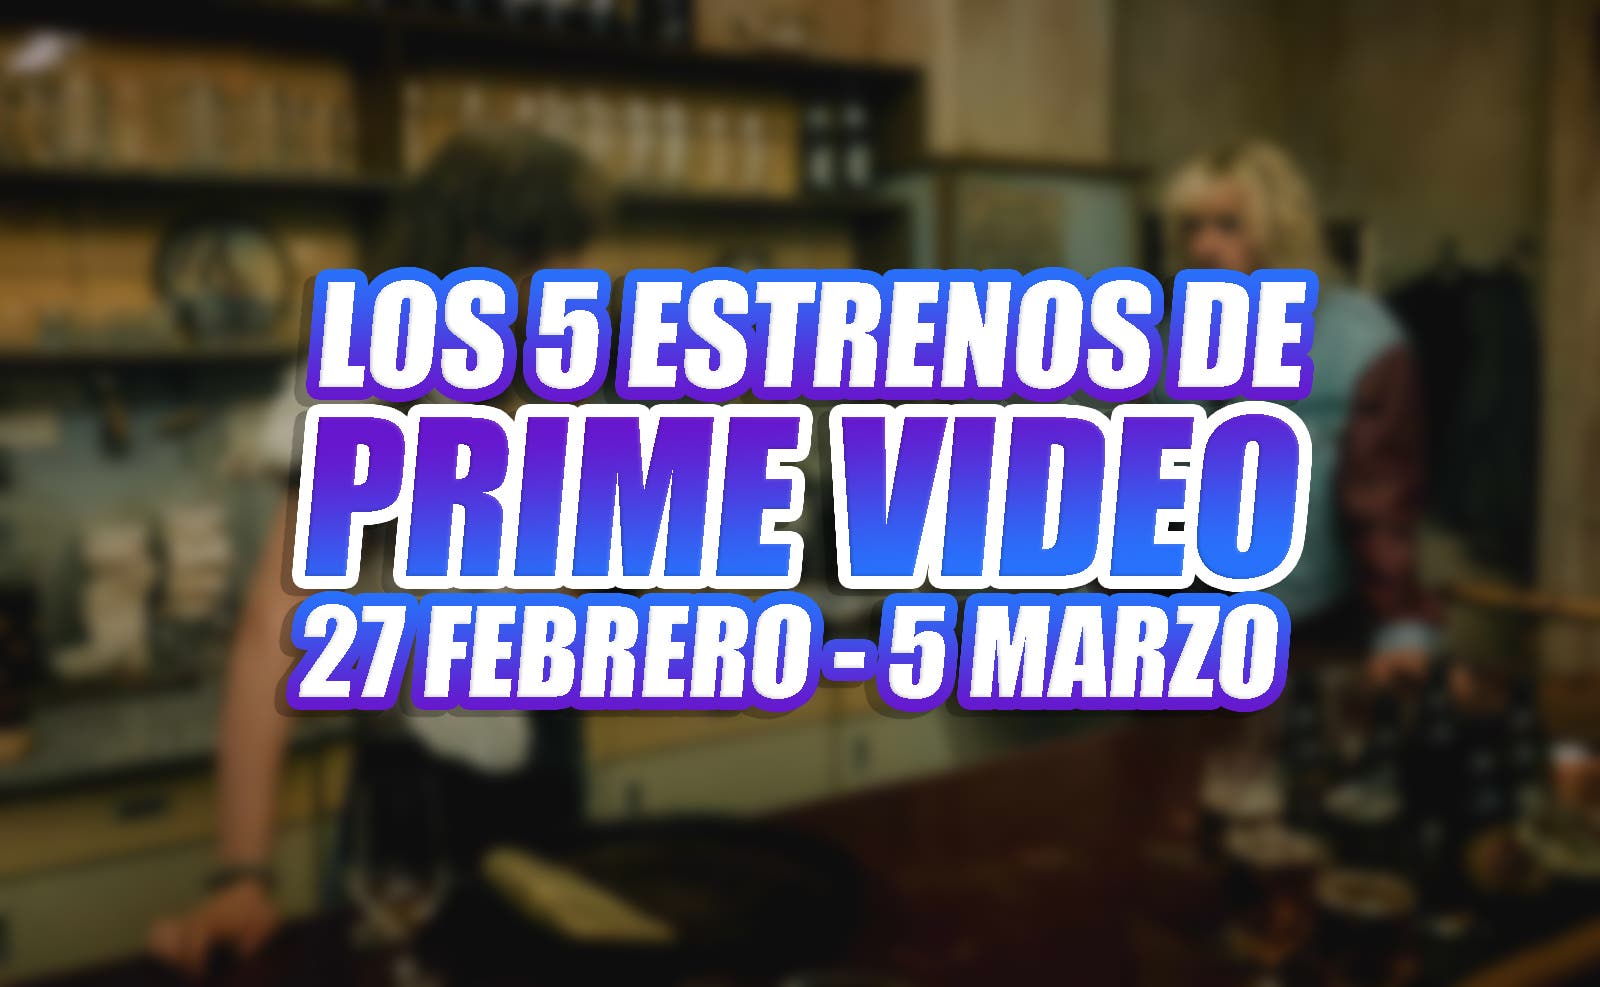 Prime Video and its 5 premieres this week (February 27 – March 5)